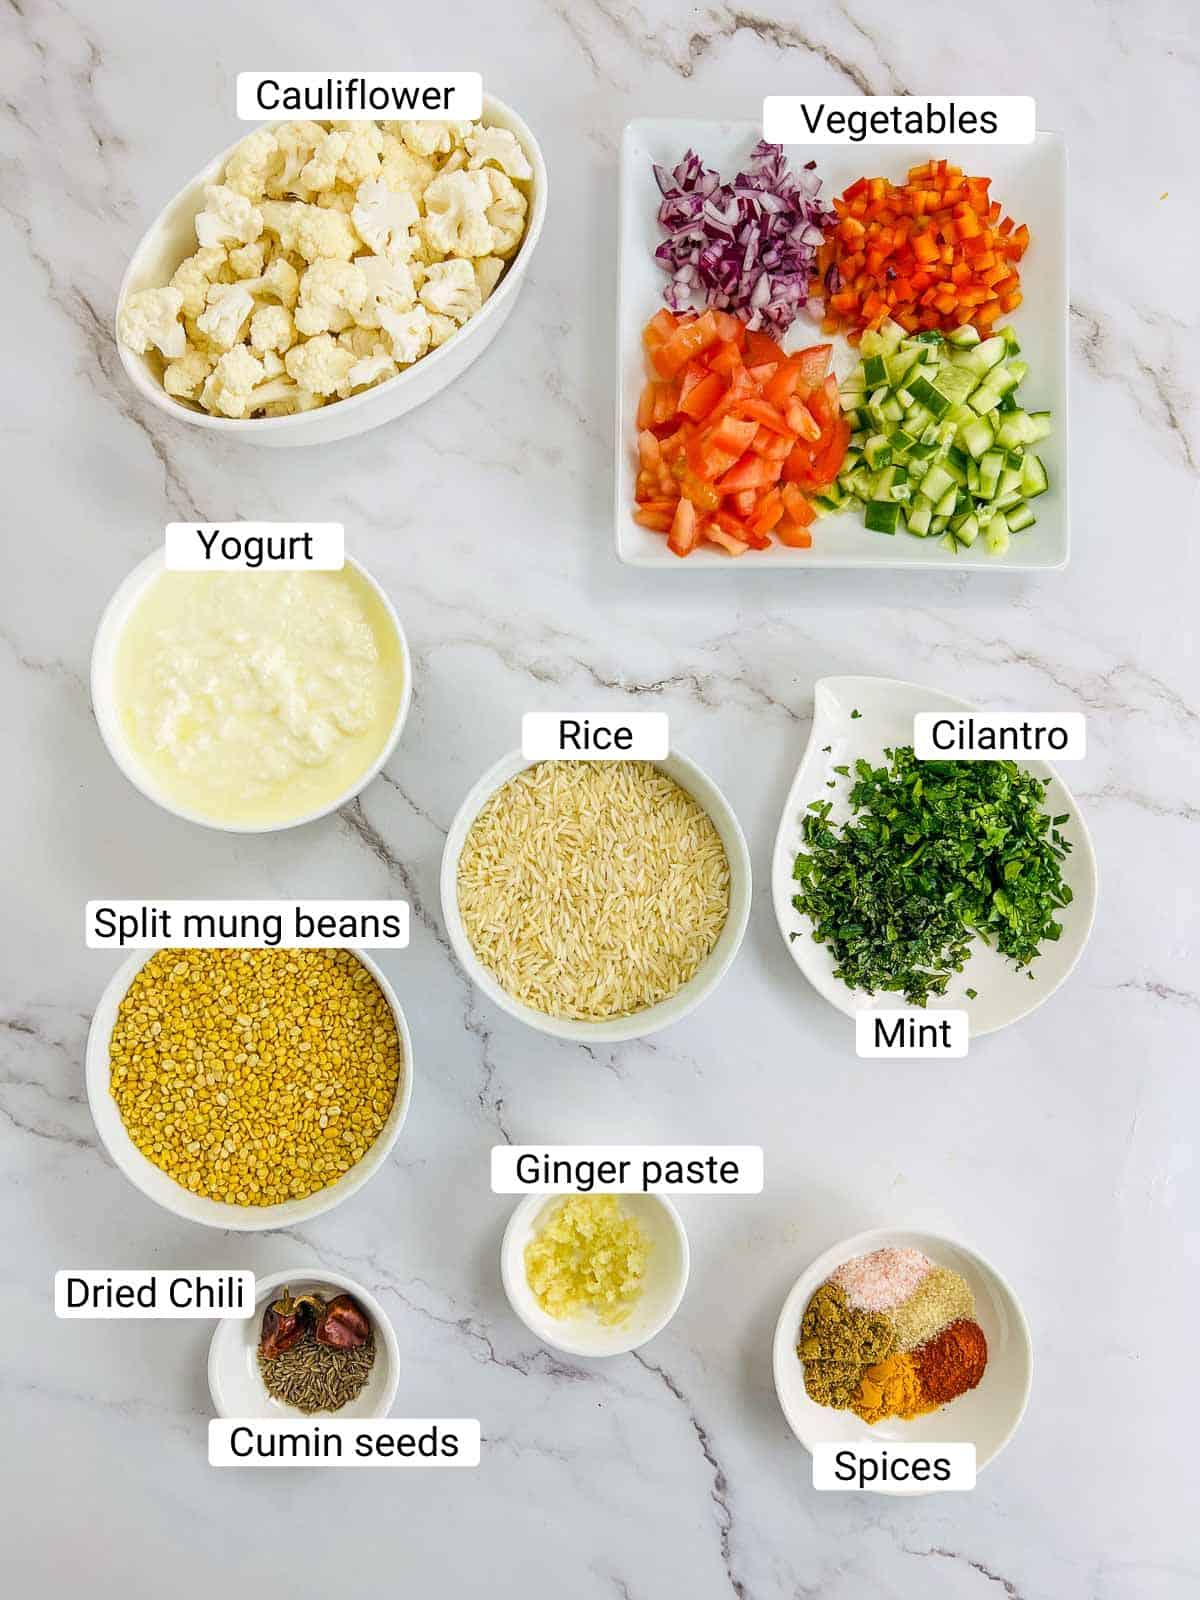 Ingredients to make yellow lentil Buddha bowl on a white surface.